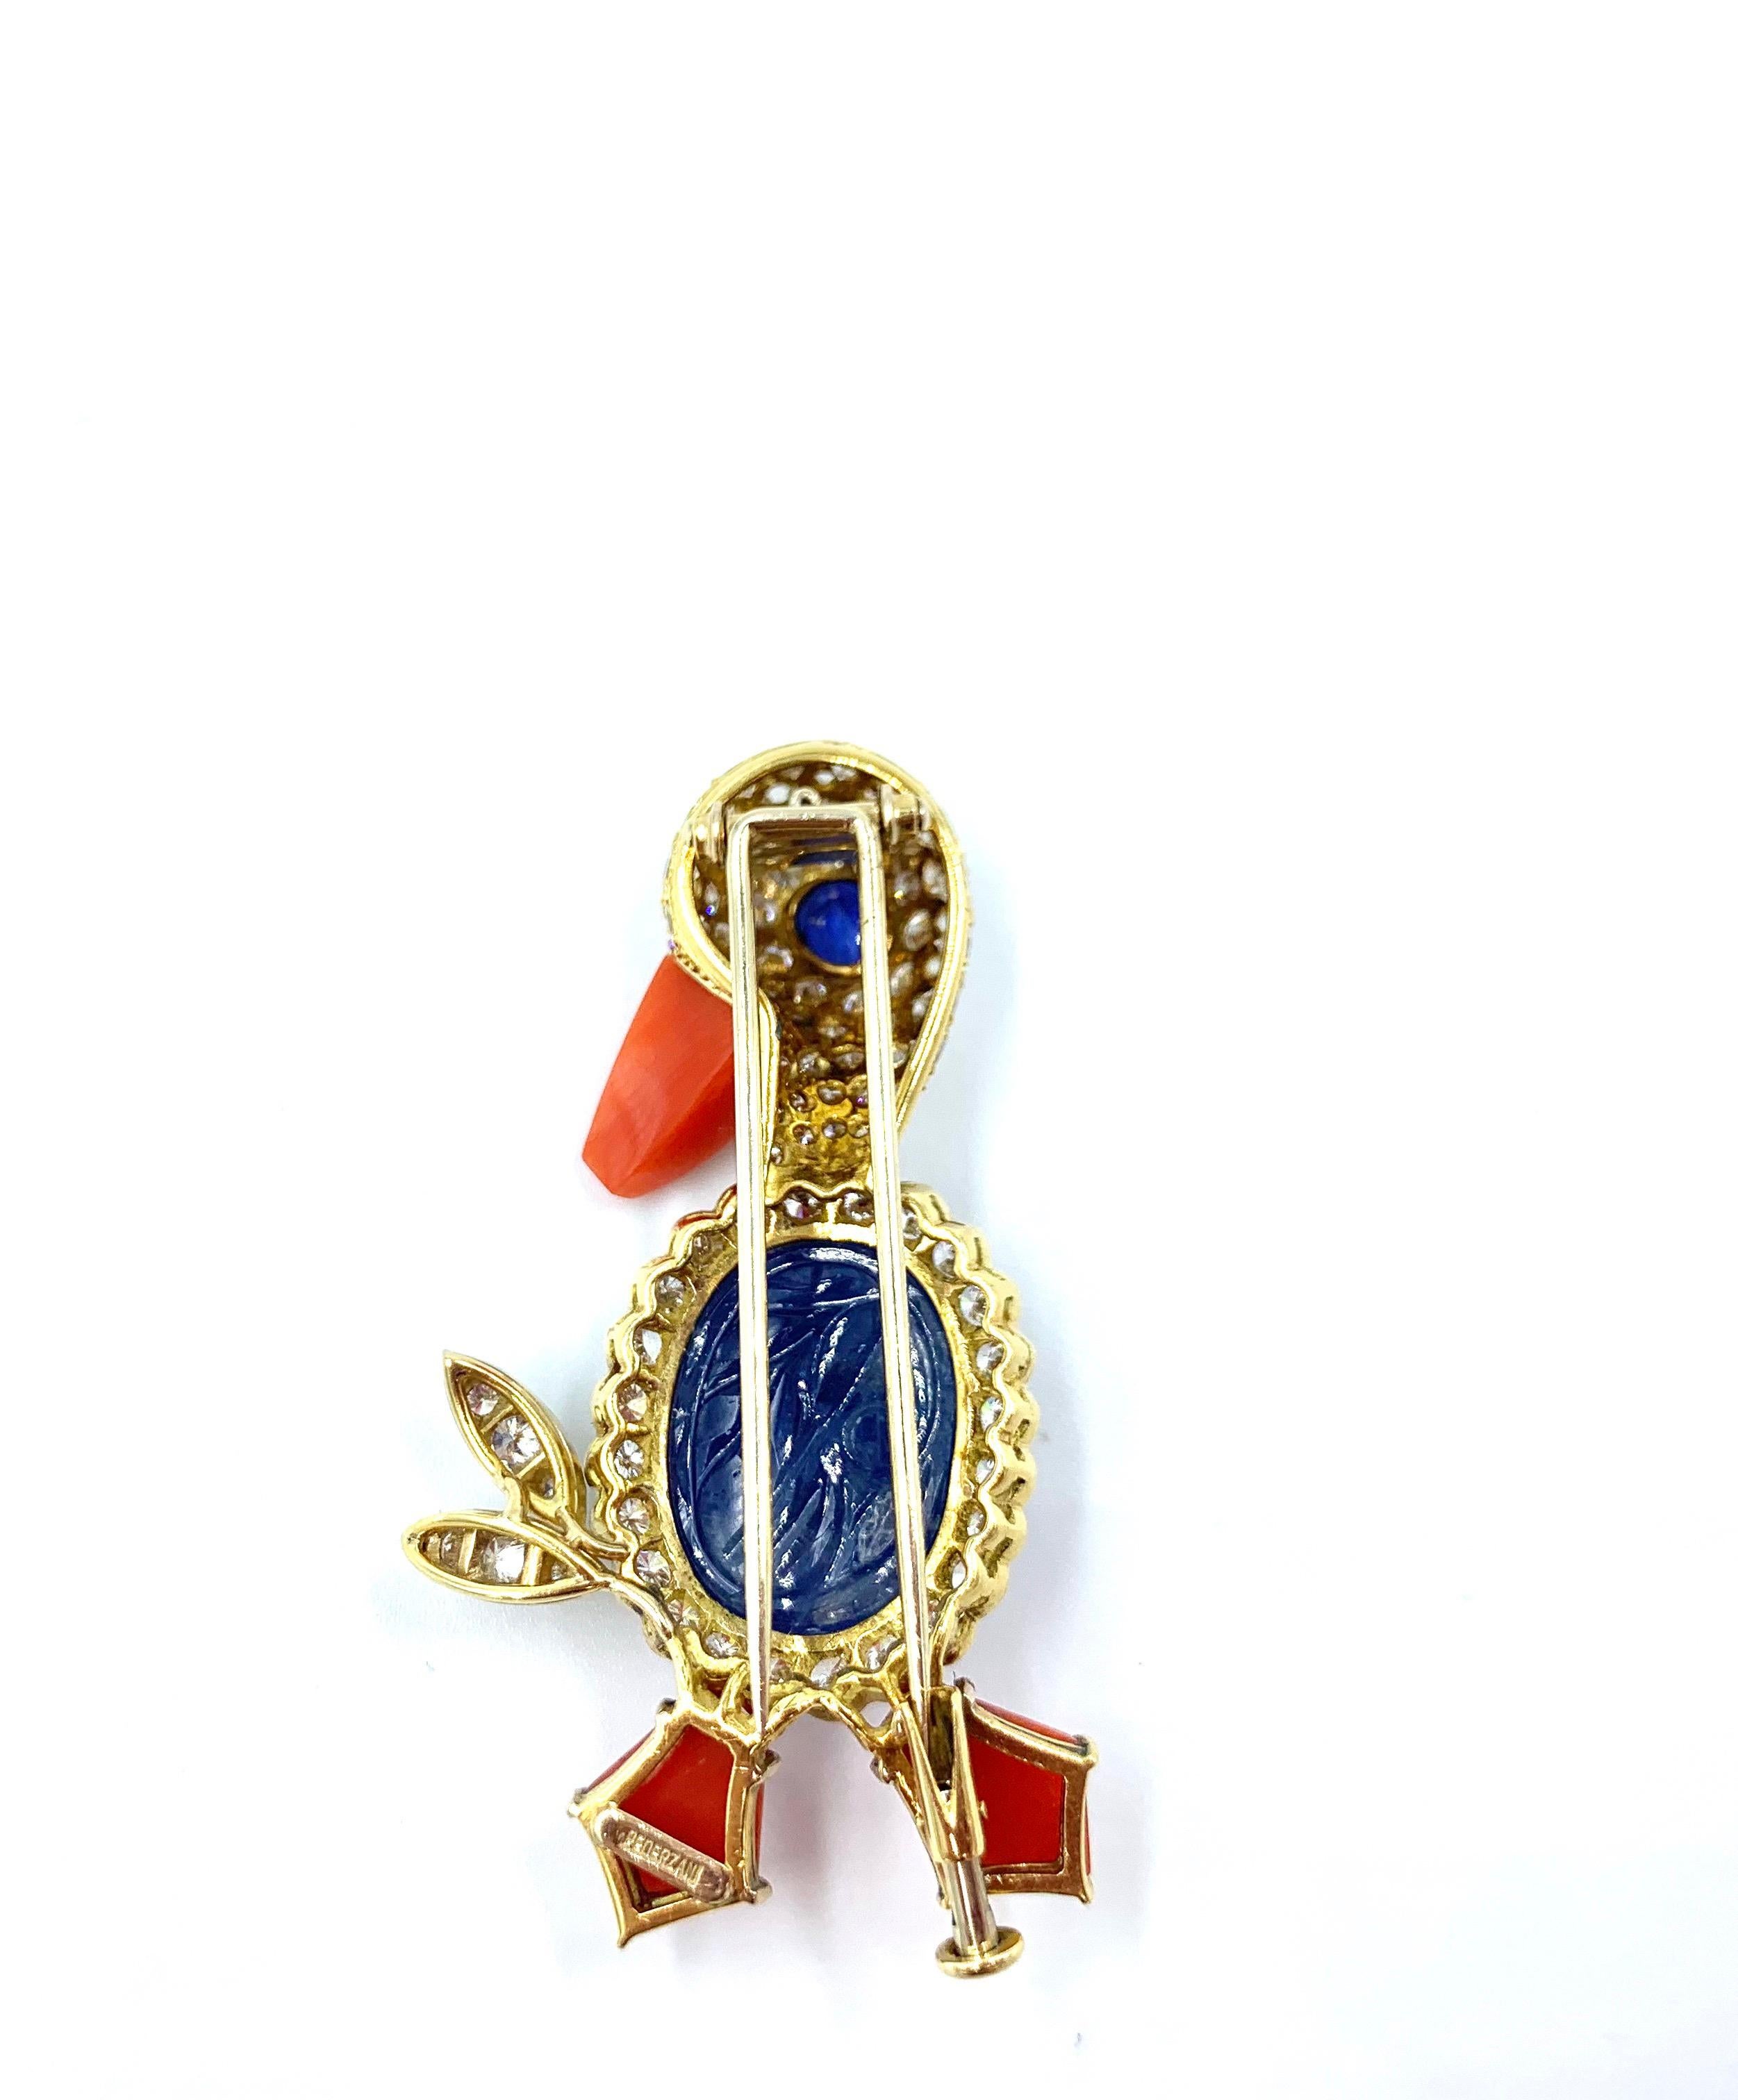 Perdezani Novelty Duck Brooch In Excellent Condition For Sale In West Palm Beach, FL